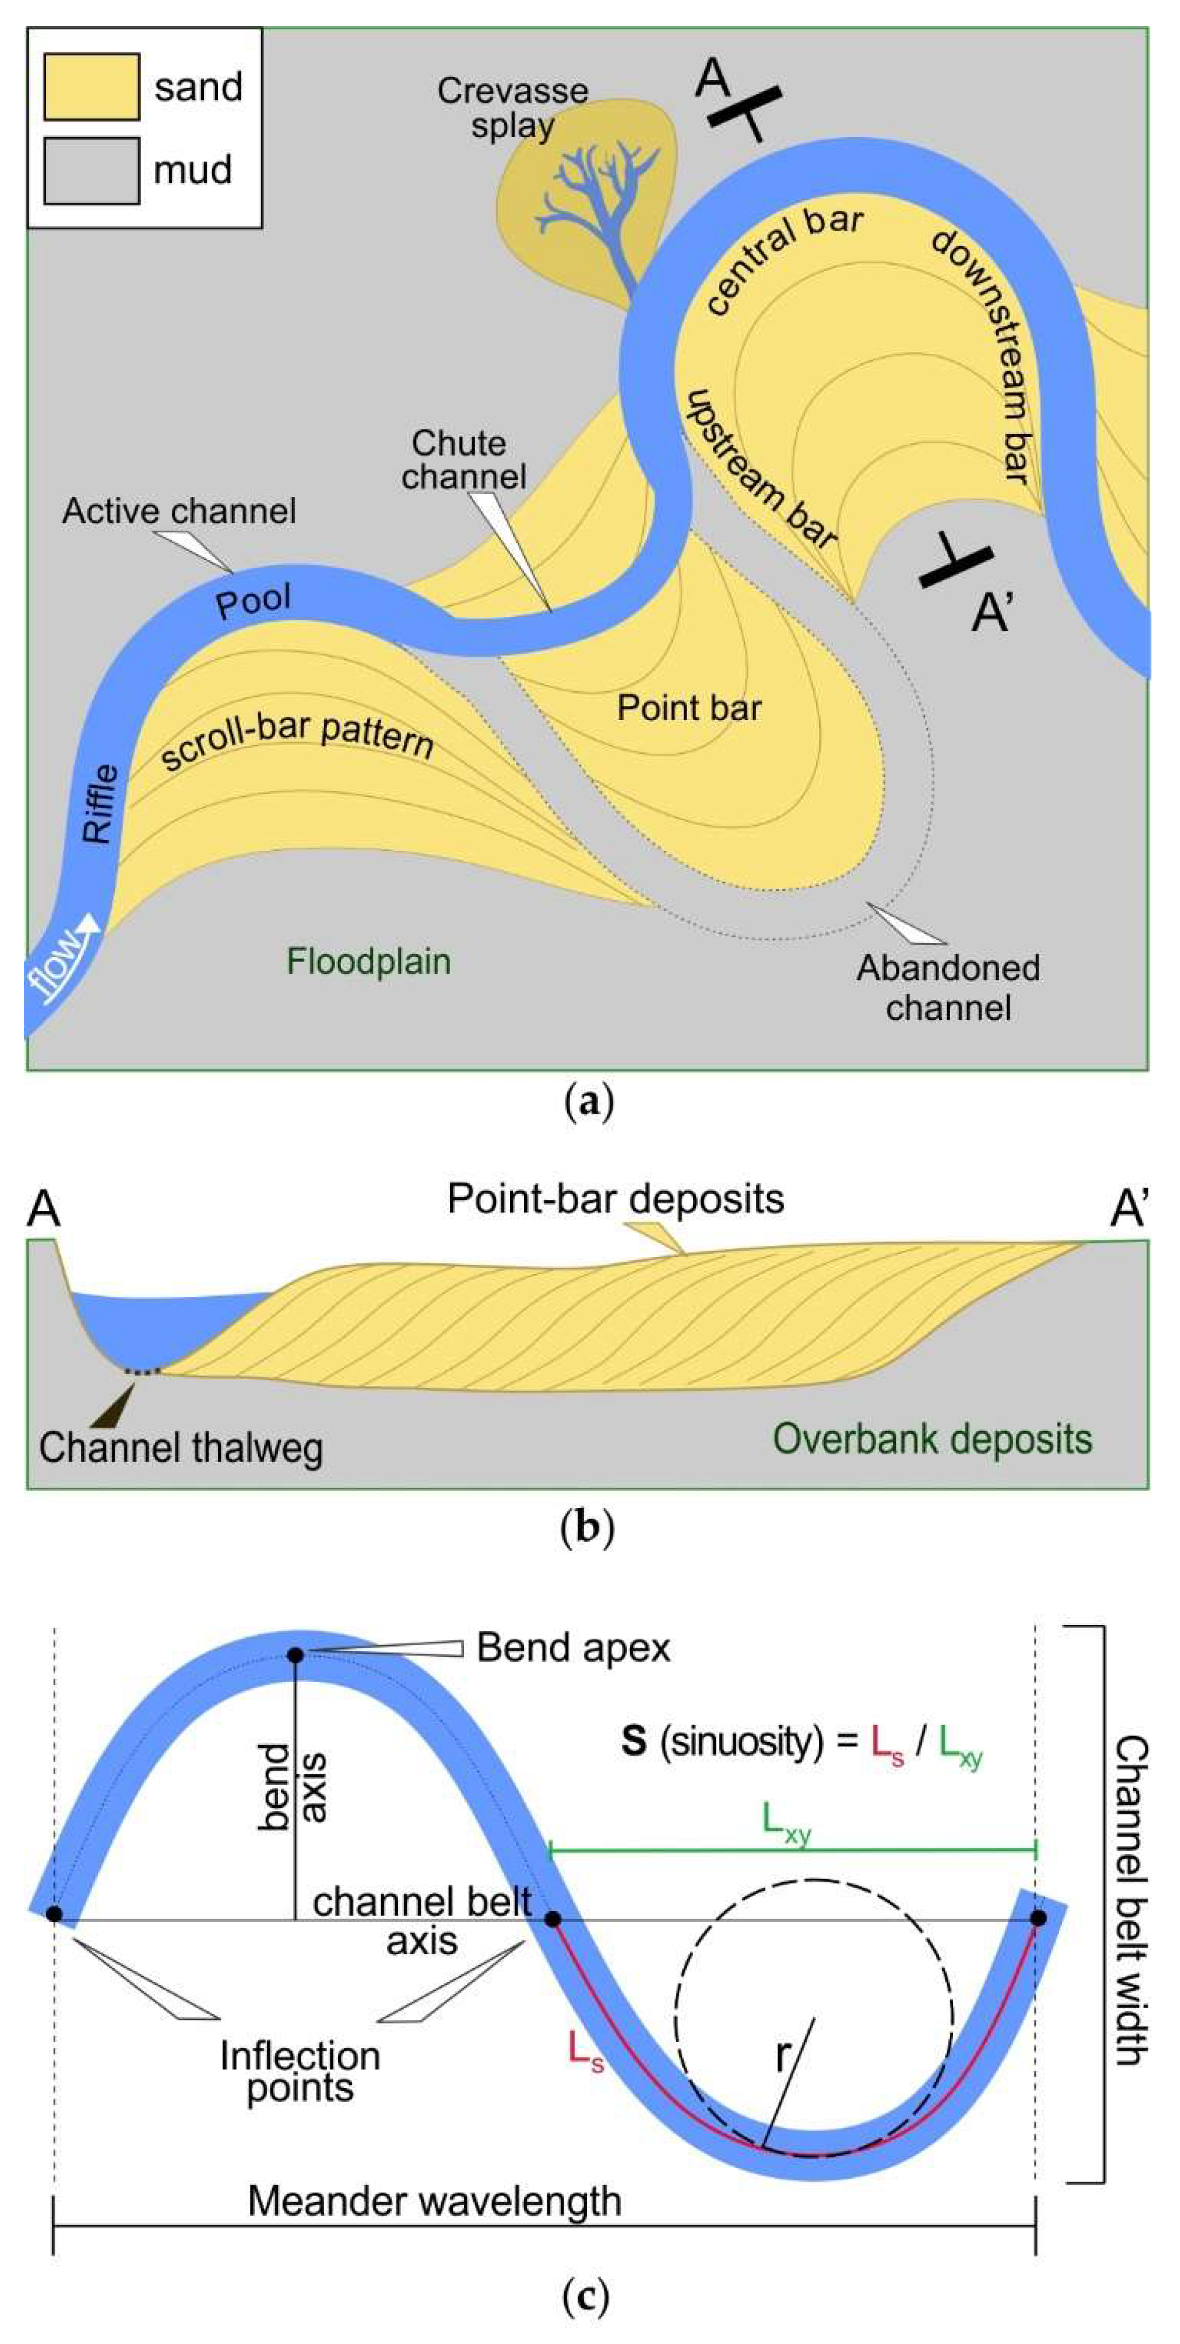 Remote Sensing | Free Full-Text | Geophysical and Sedimentological  Investigations Integrate Remote-Sensing Data to Depict Geometry of Fluvial  Sedimentary Bodies: An Example from Holocene Point-Bar Deposits of the  Venetian Plain (Italy)